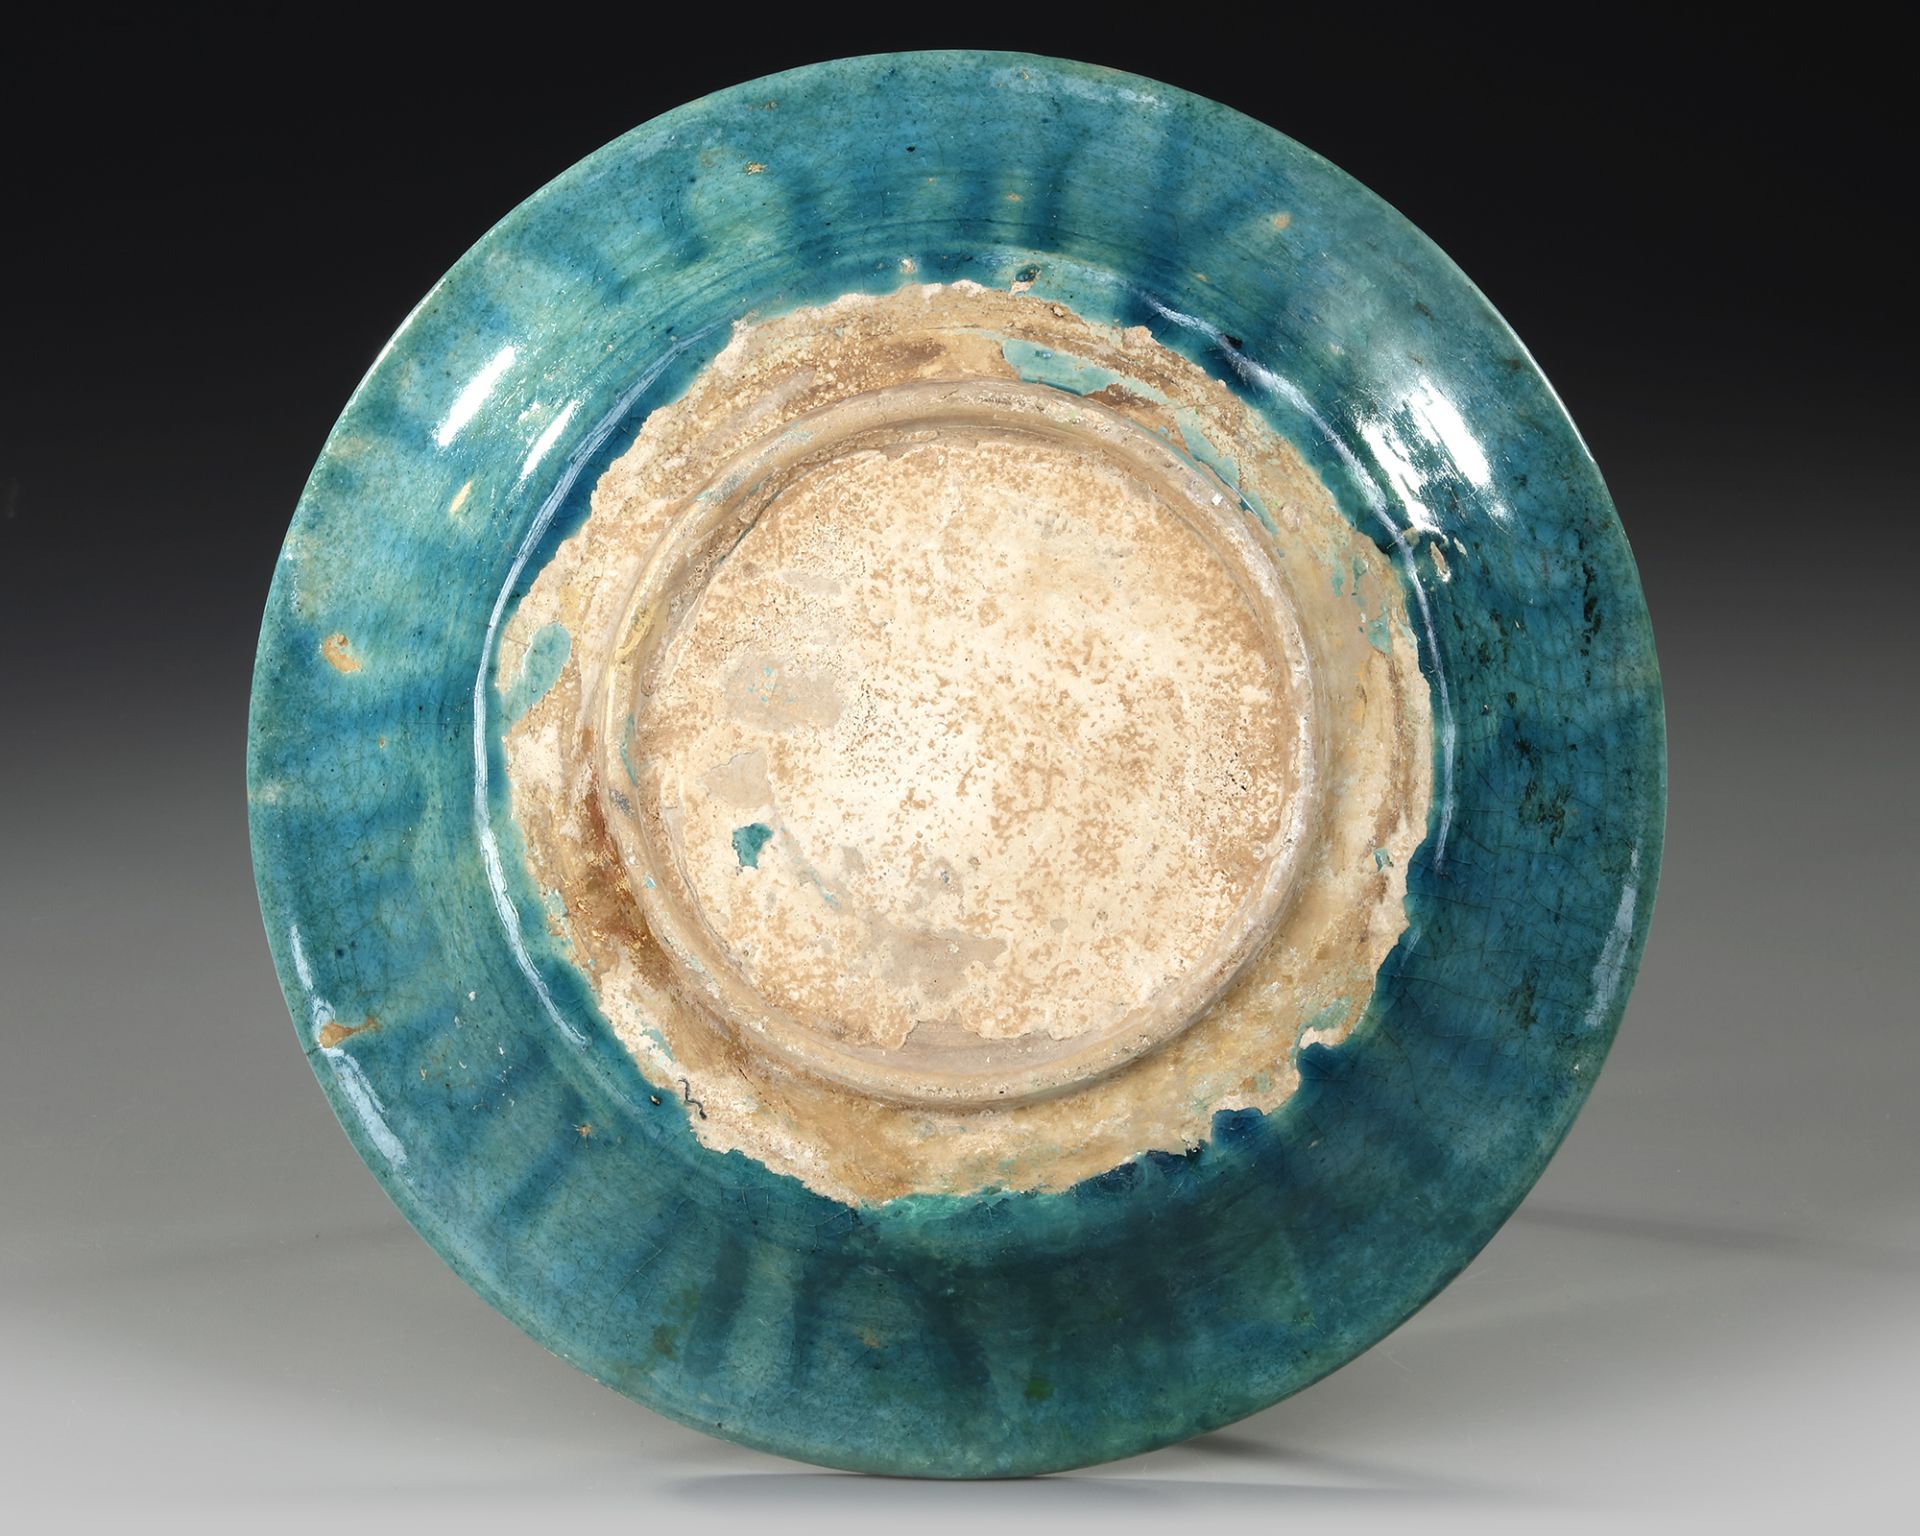 A RAQQA TURQUOISE-GLAZED POTTERY DISH, SYRIA, EARLY 13TH CENTURY - Image 7 of 8